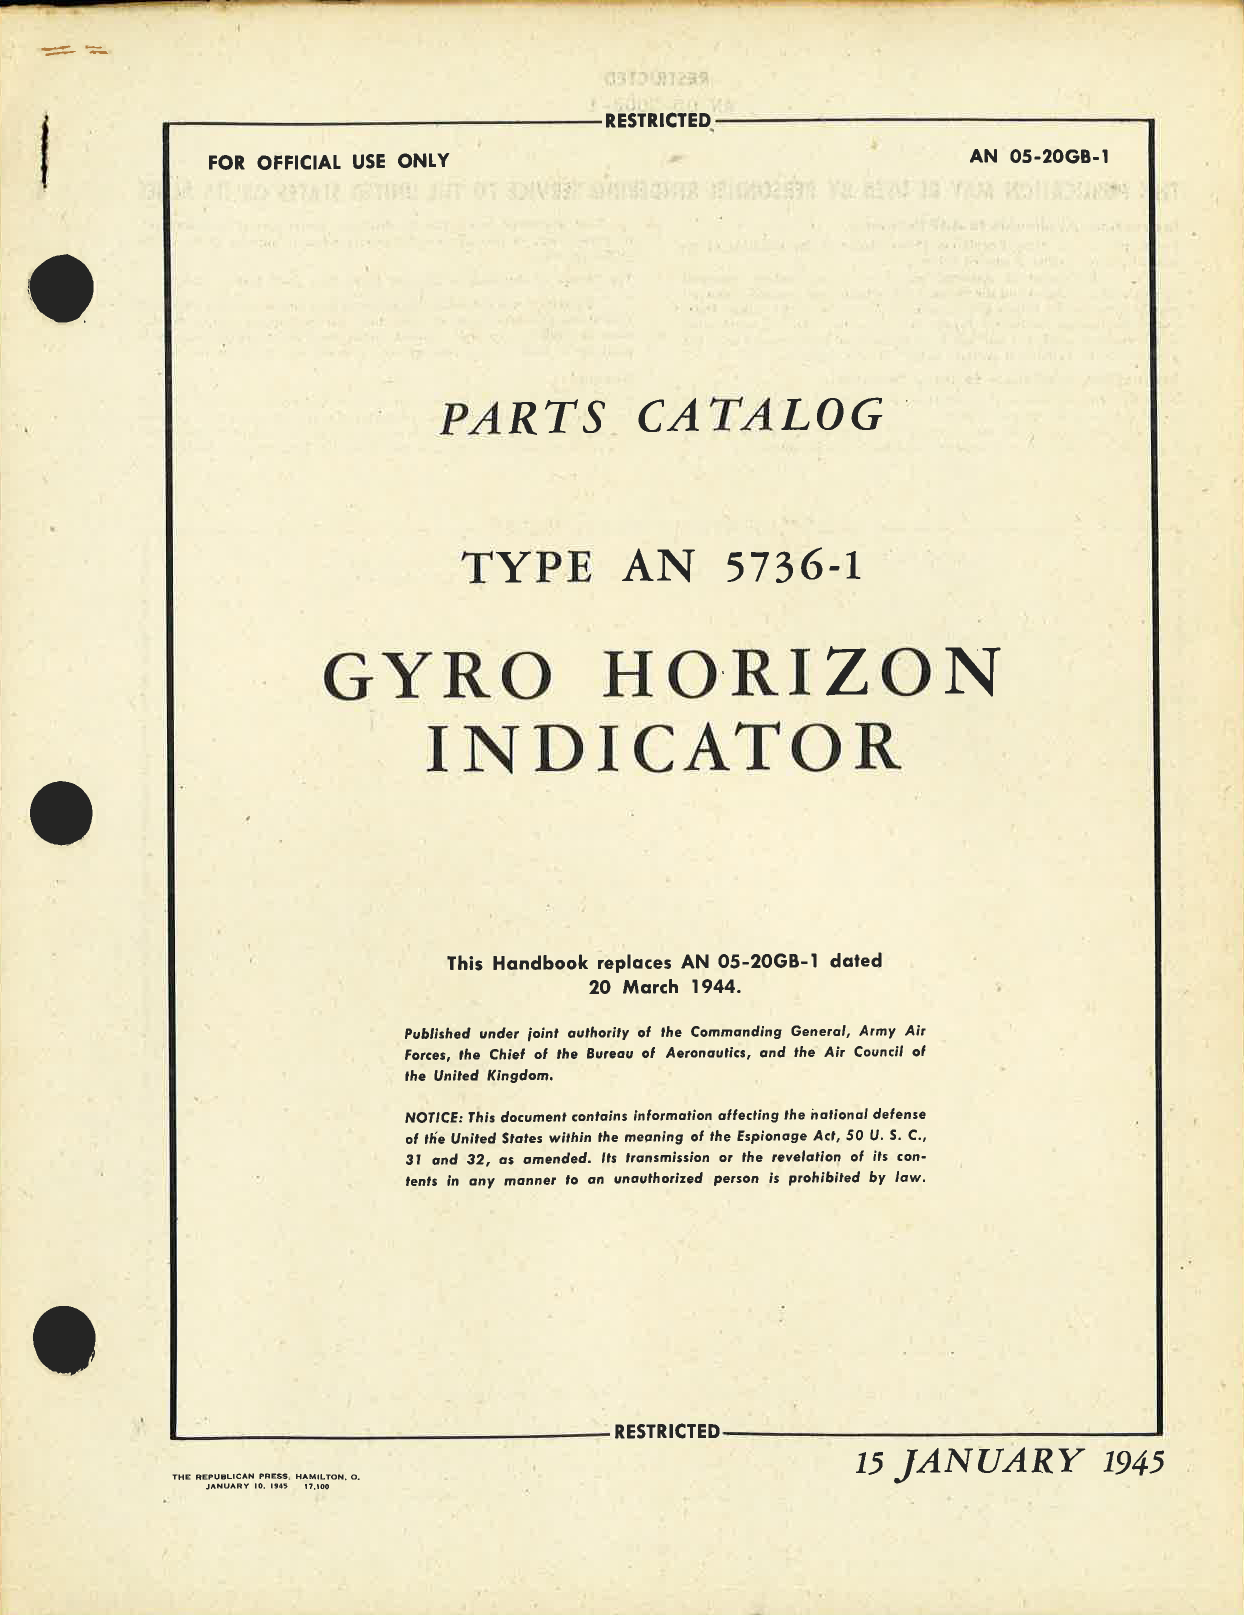 Sample page 1 from AirCorps Library document: Parts Catalog for Type AN 5736-1 Gyro Horizon Indicator